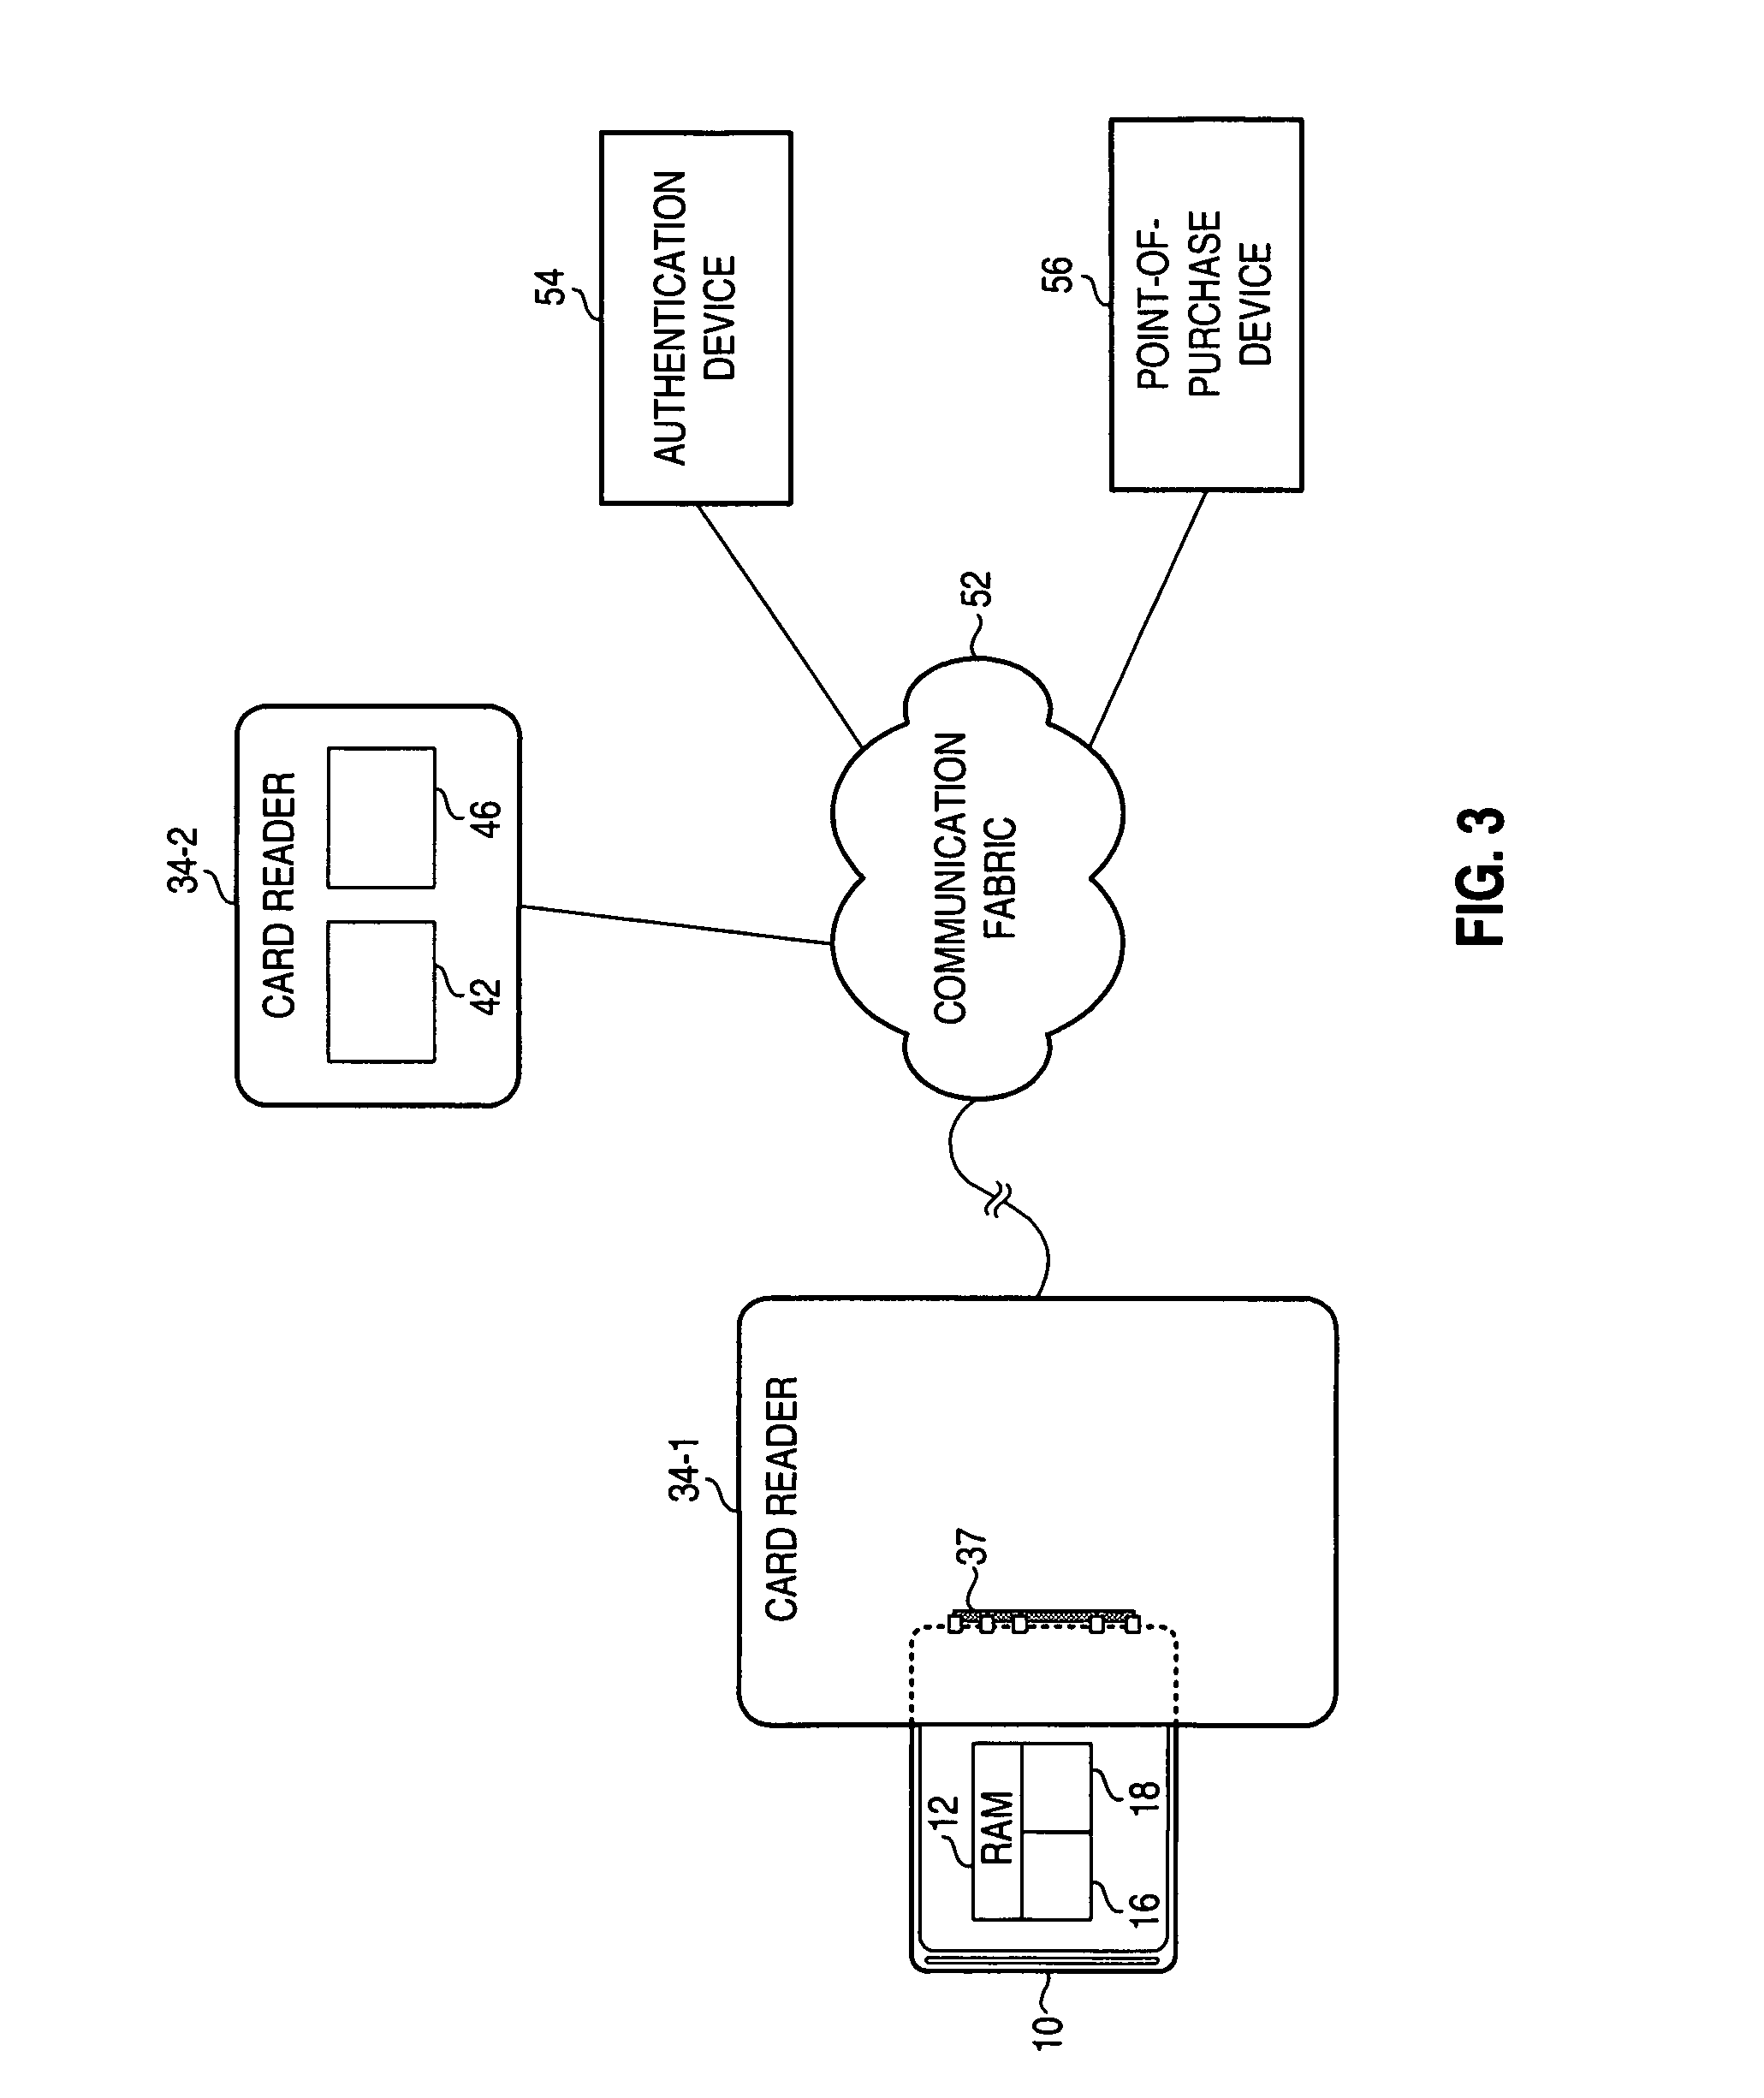 Arrangement, apparatus, and associated method, for providing stored data in secured form for purposes of identification and informational storage